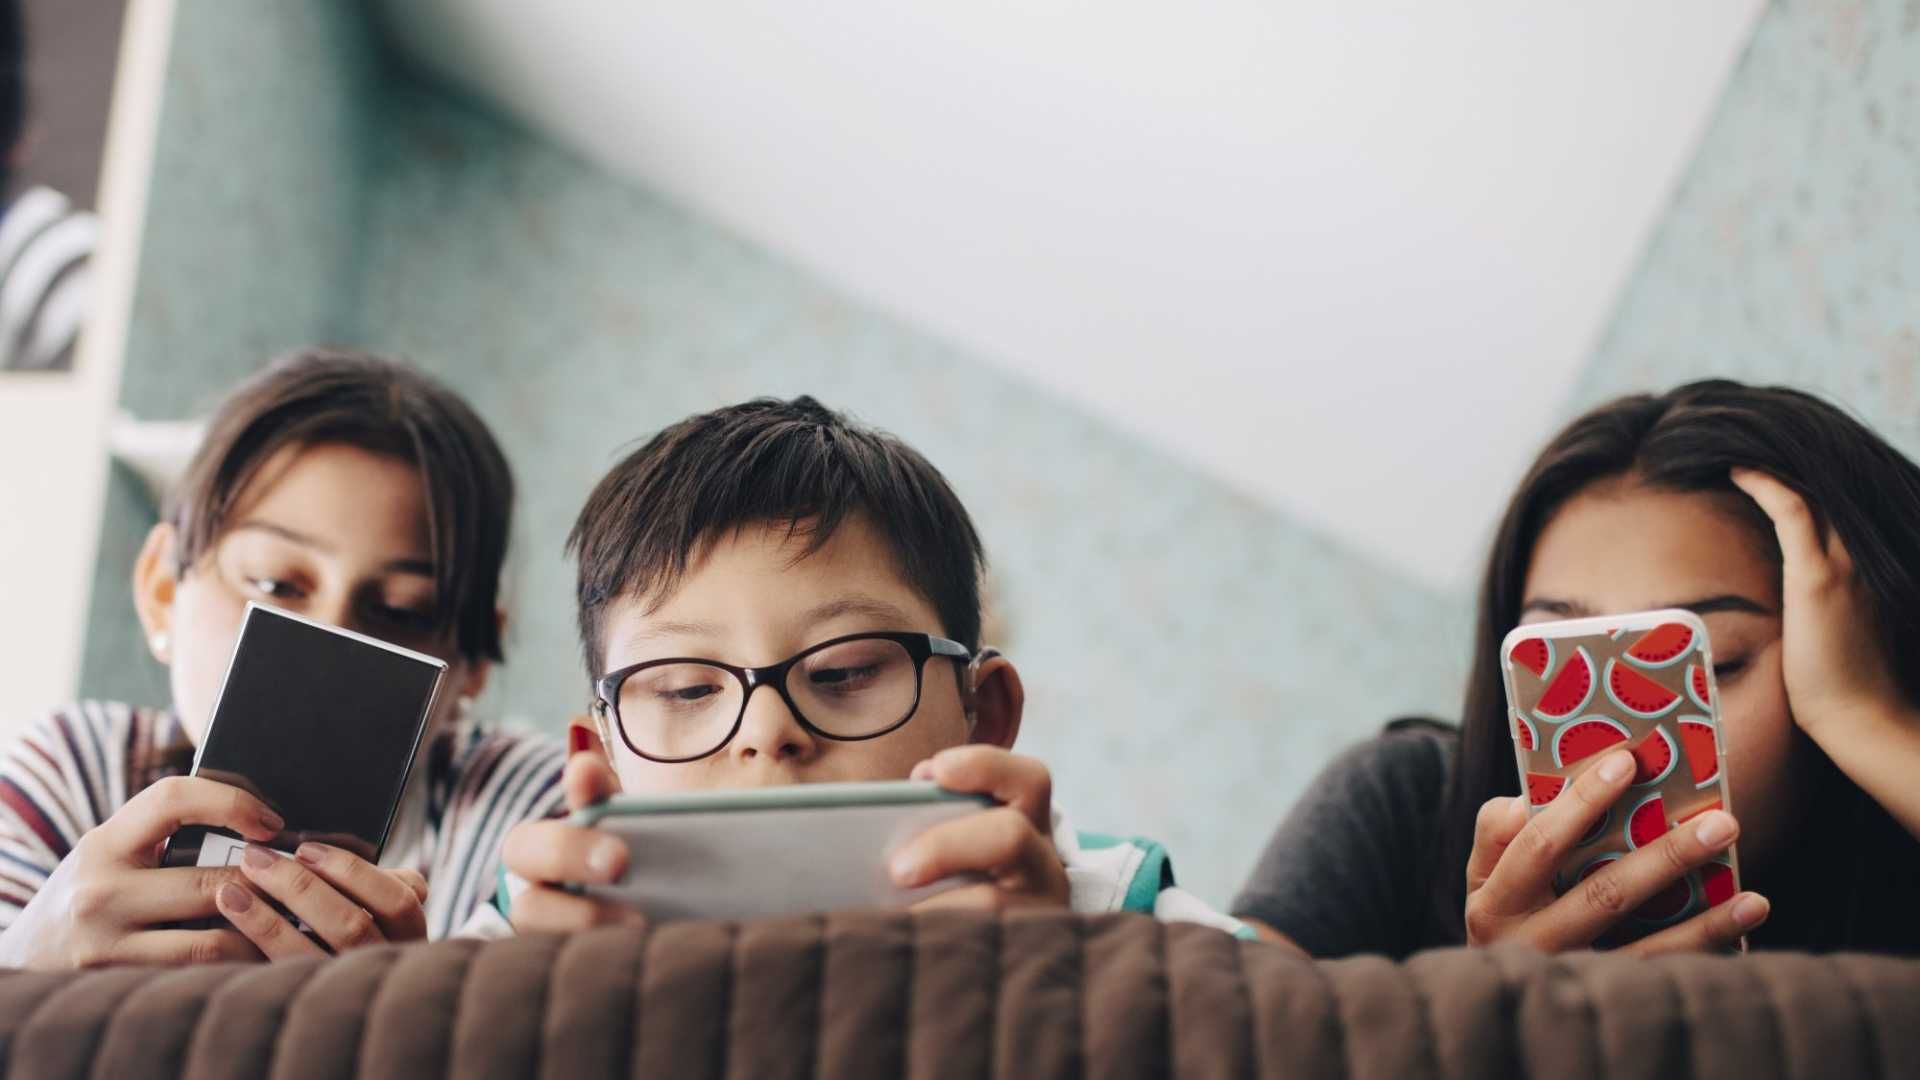 Unplug and Reconnect: 5 Tips to Reduce Screen Time